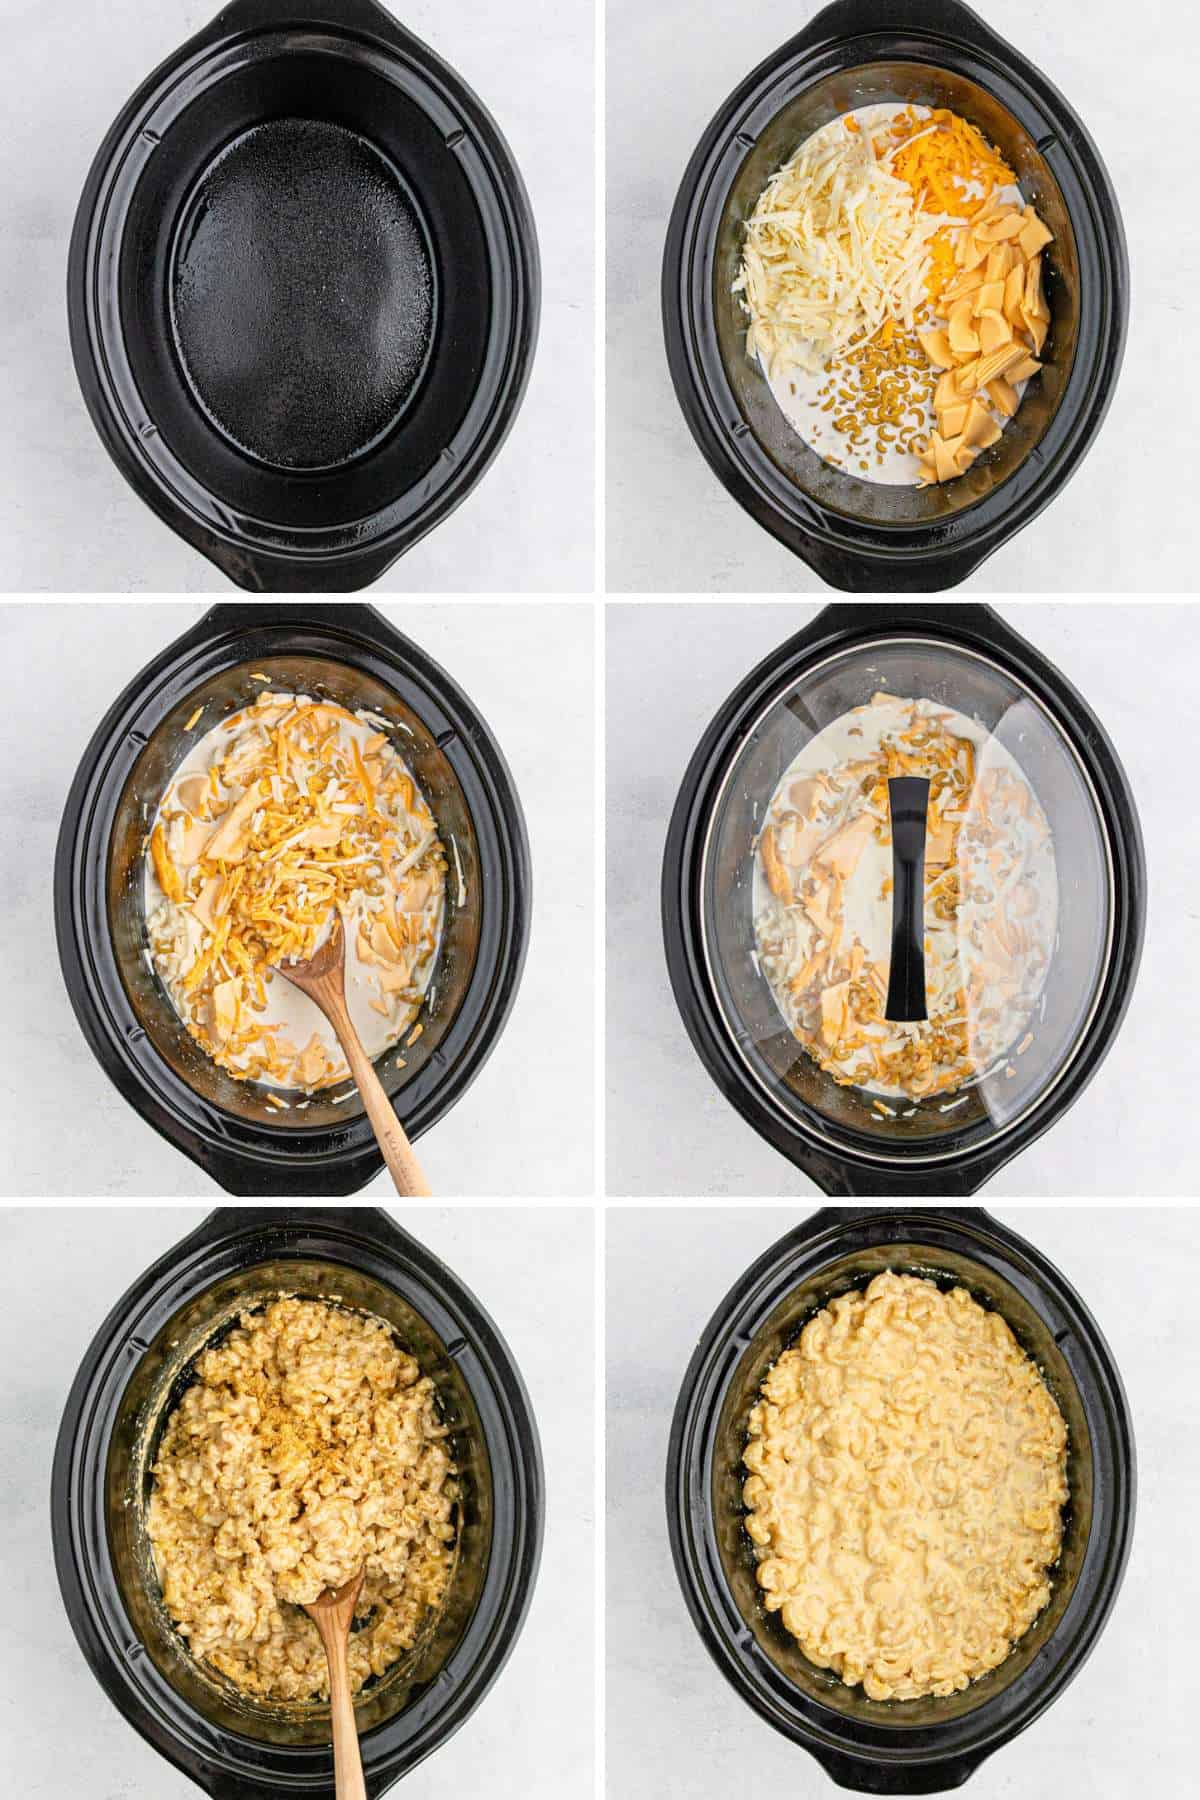 A collage showing the different steps for making macaroni and cheese in the crockpot.